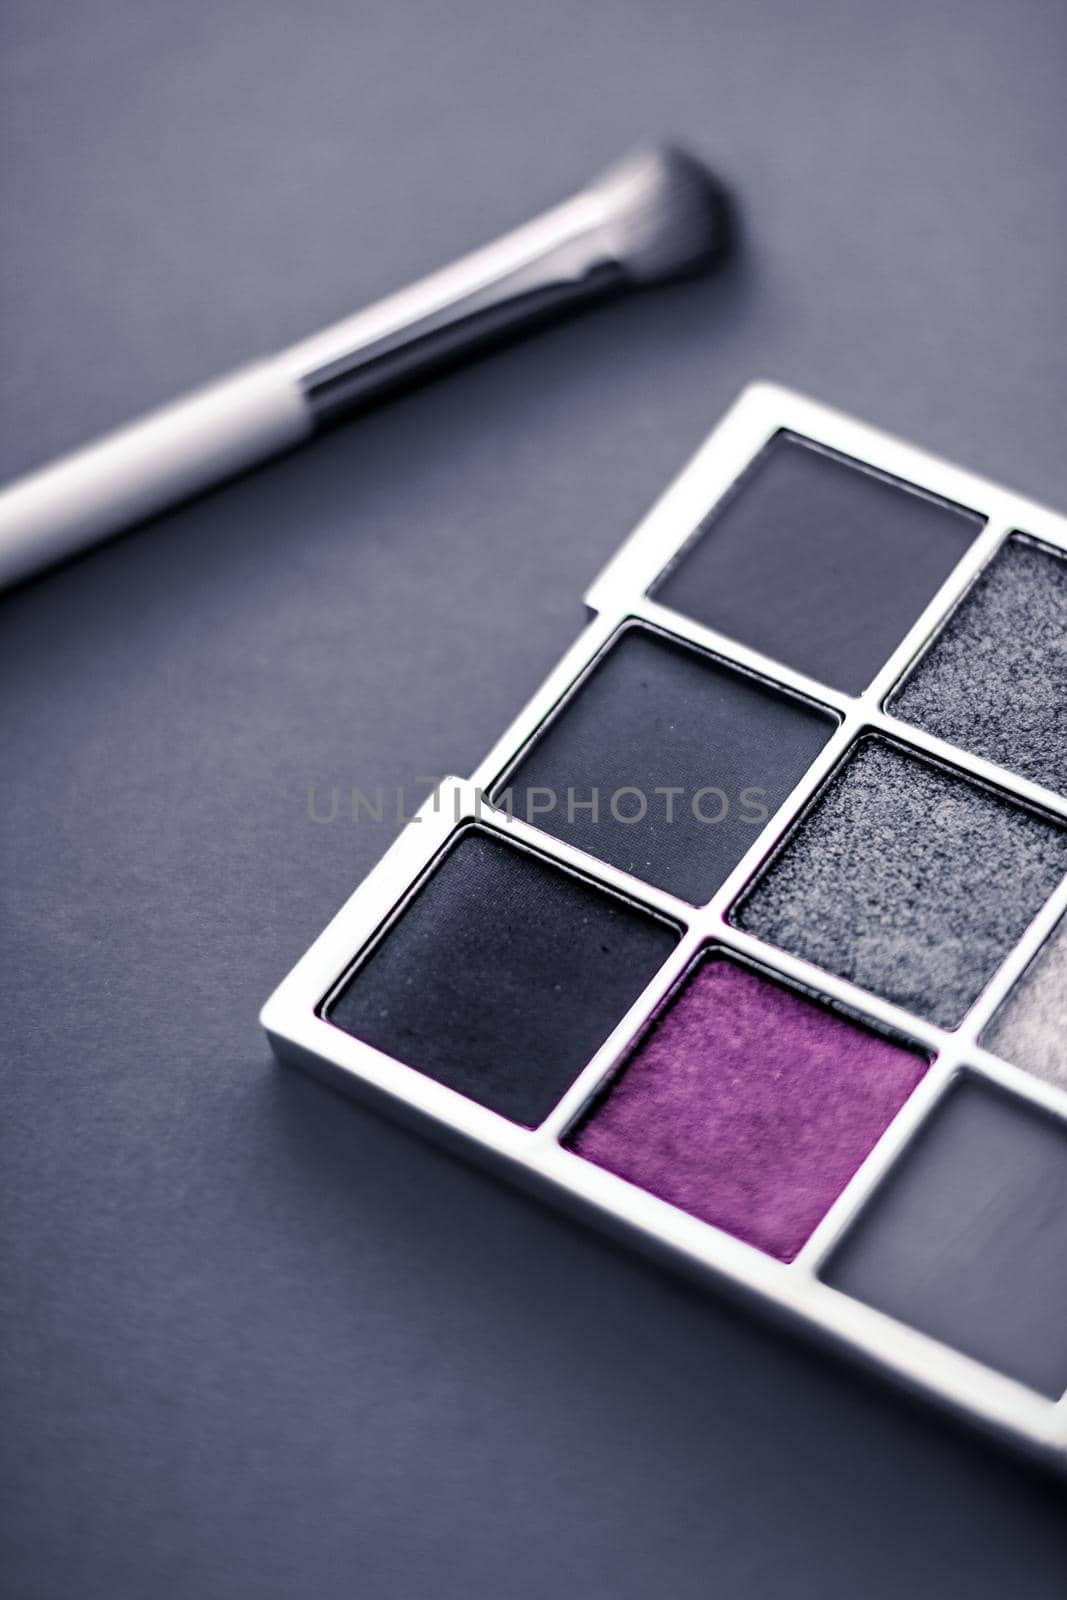 Eyeshadow palette and make-up brush on graphite background, eye shadows cosmetics product for luxury beauty brand promotion and holiday fashion blog design by Anneleven